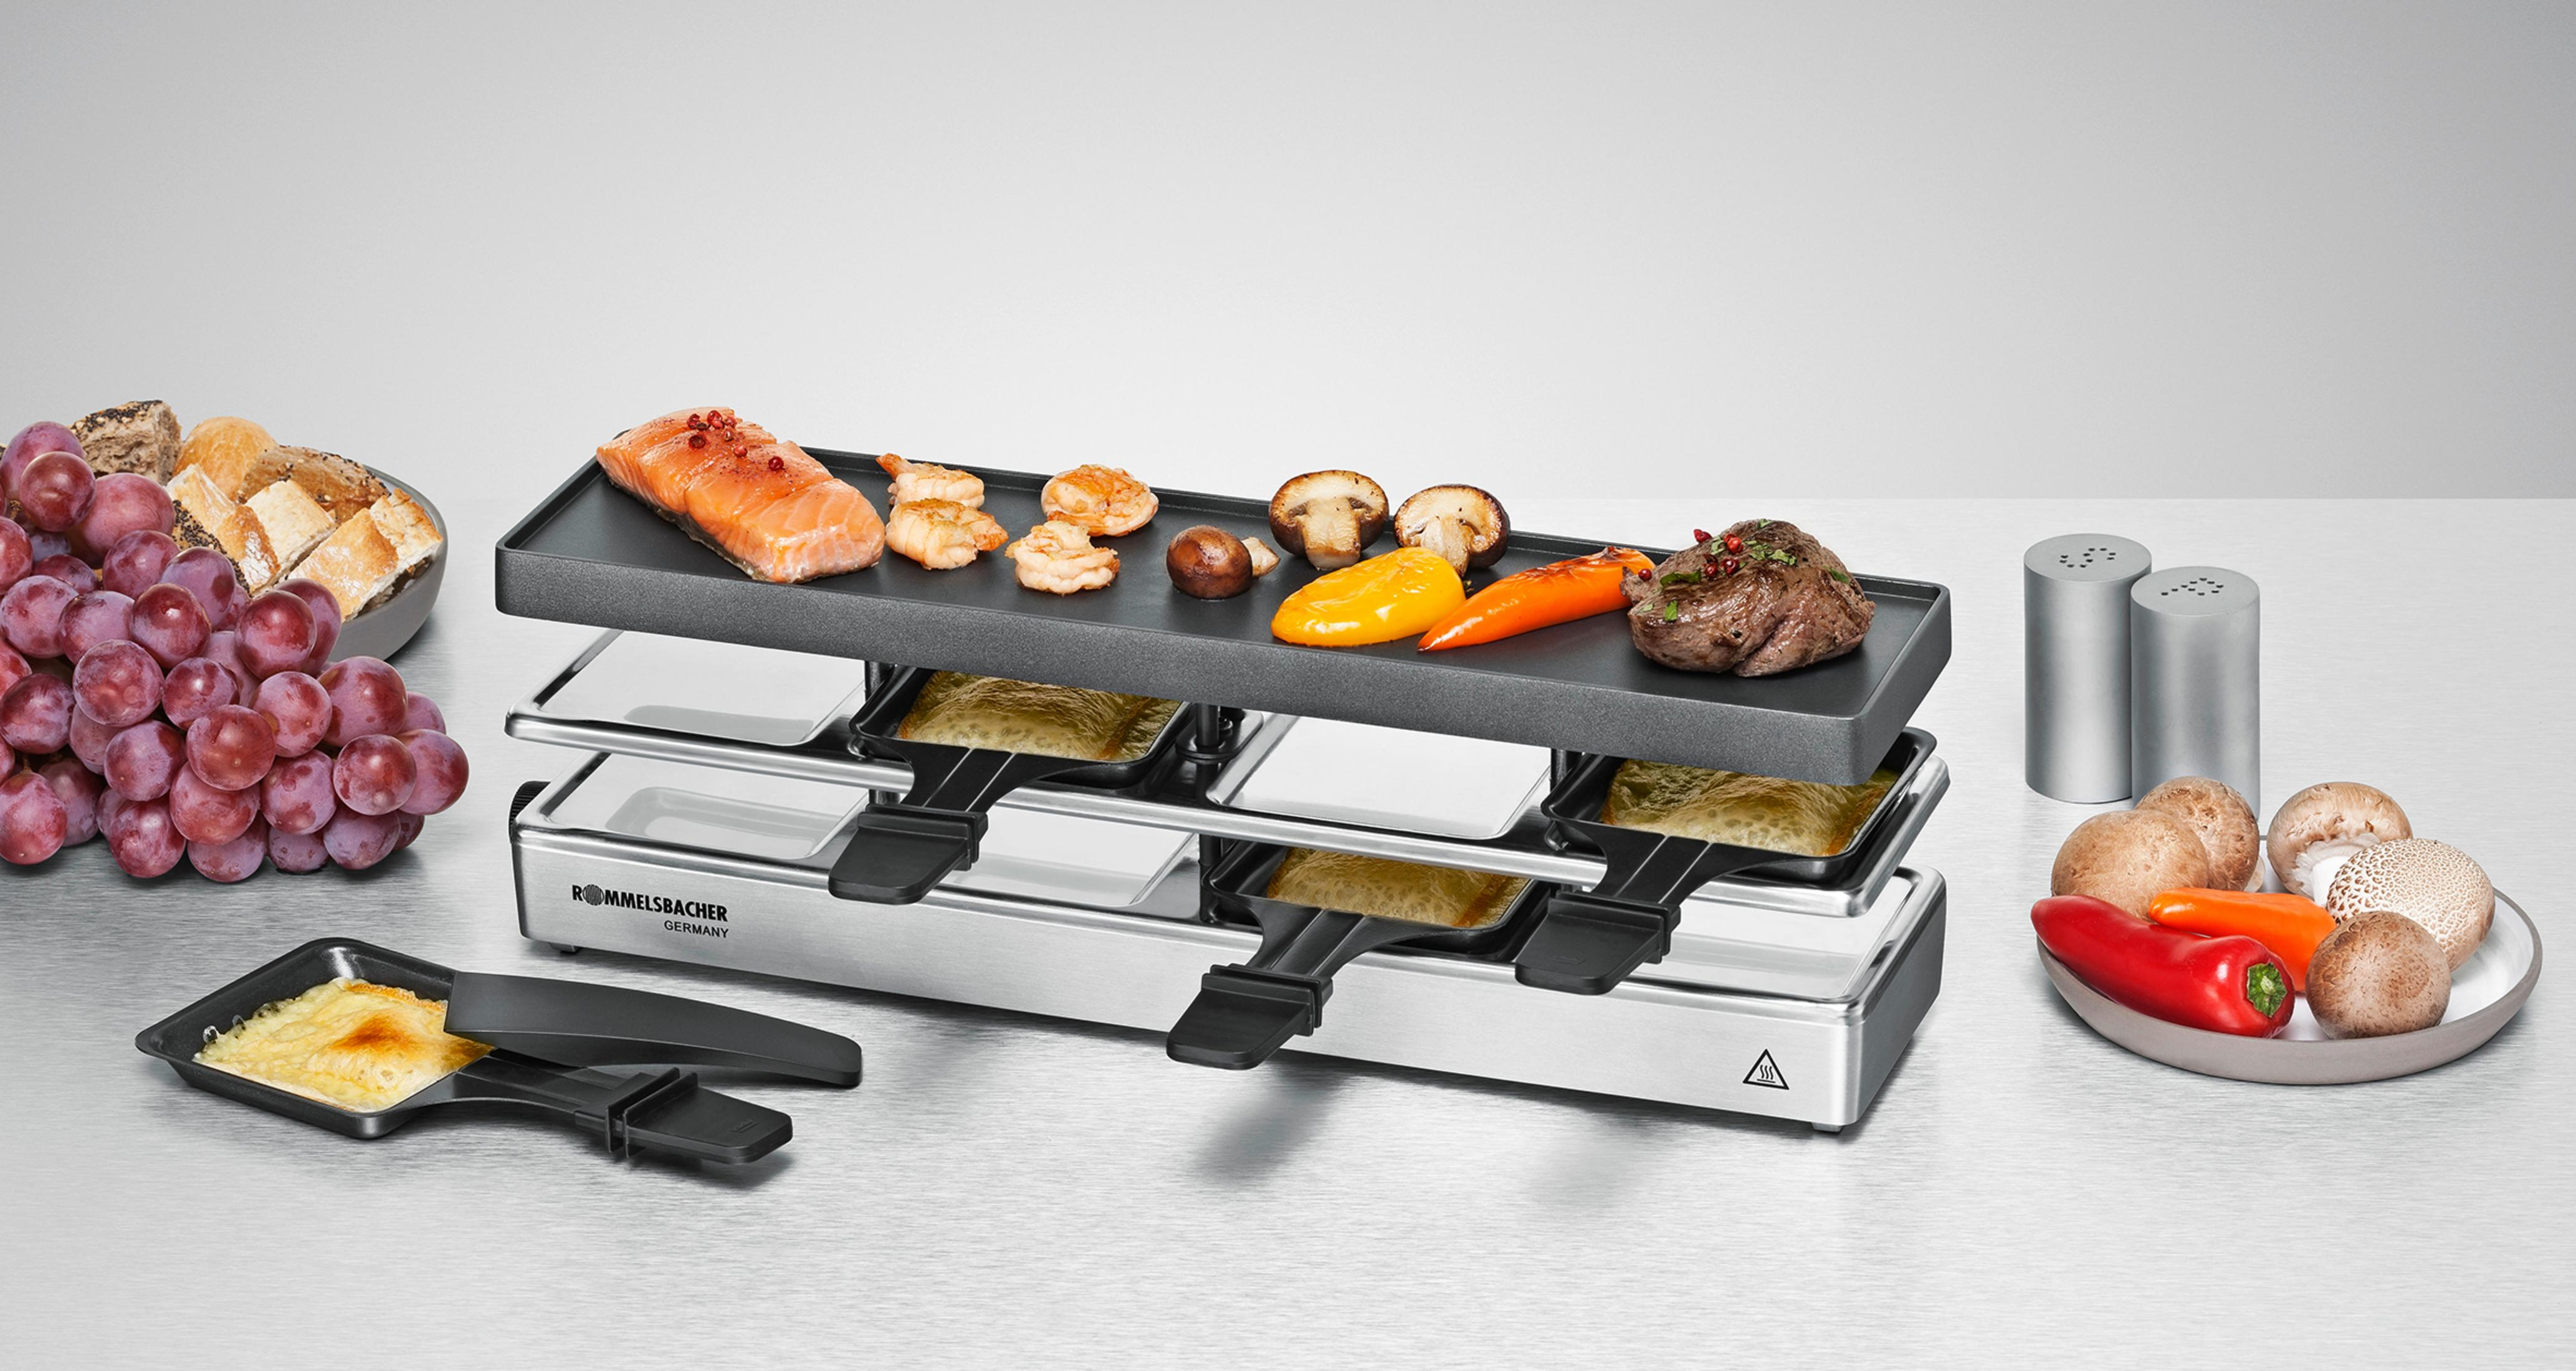 4 RC 800 ROMMELSBACHER FOR FUN Raclette